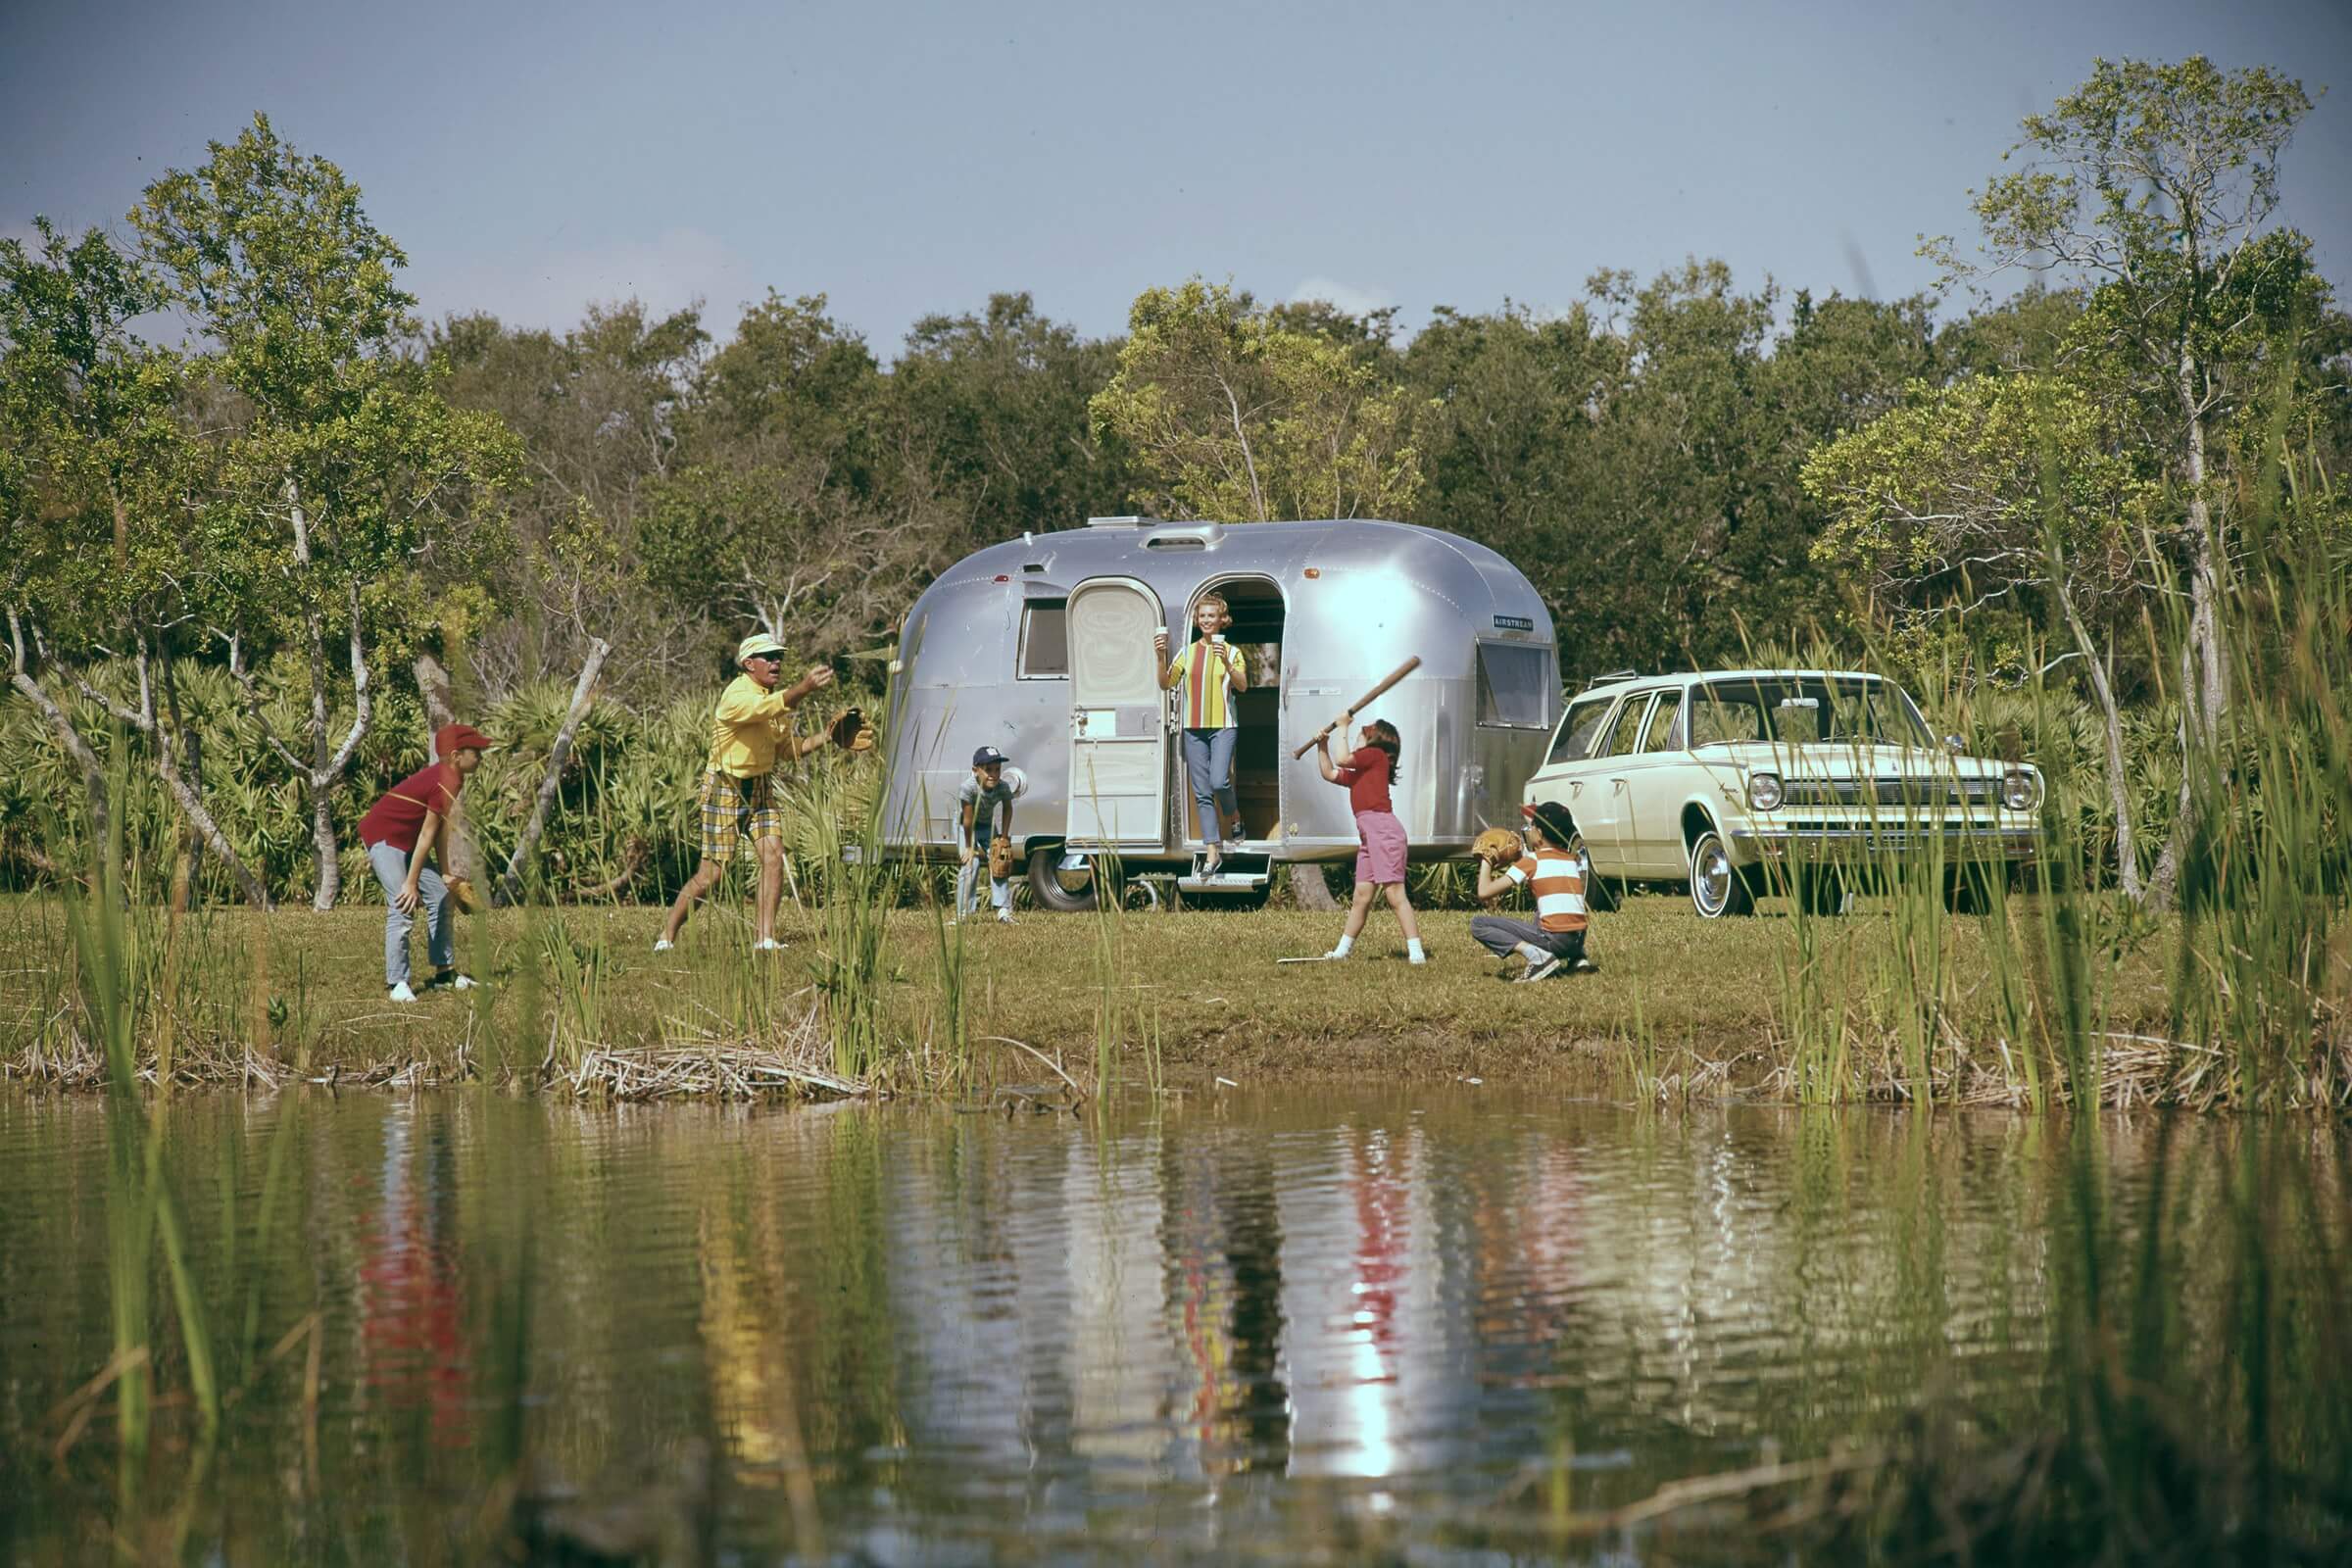 RV Park in Tyler, TX vintage airstream family by pond